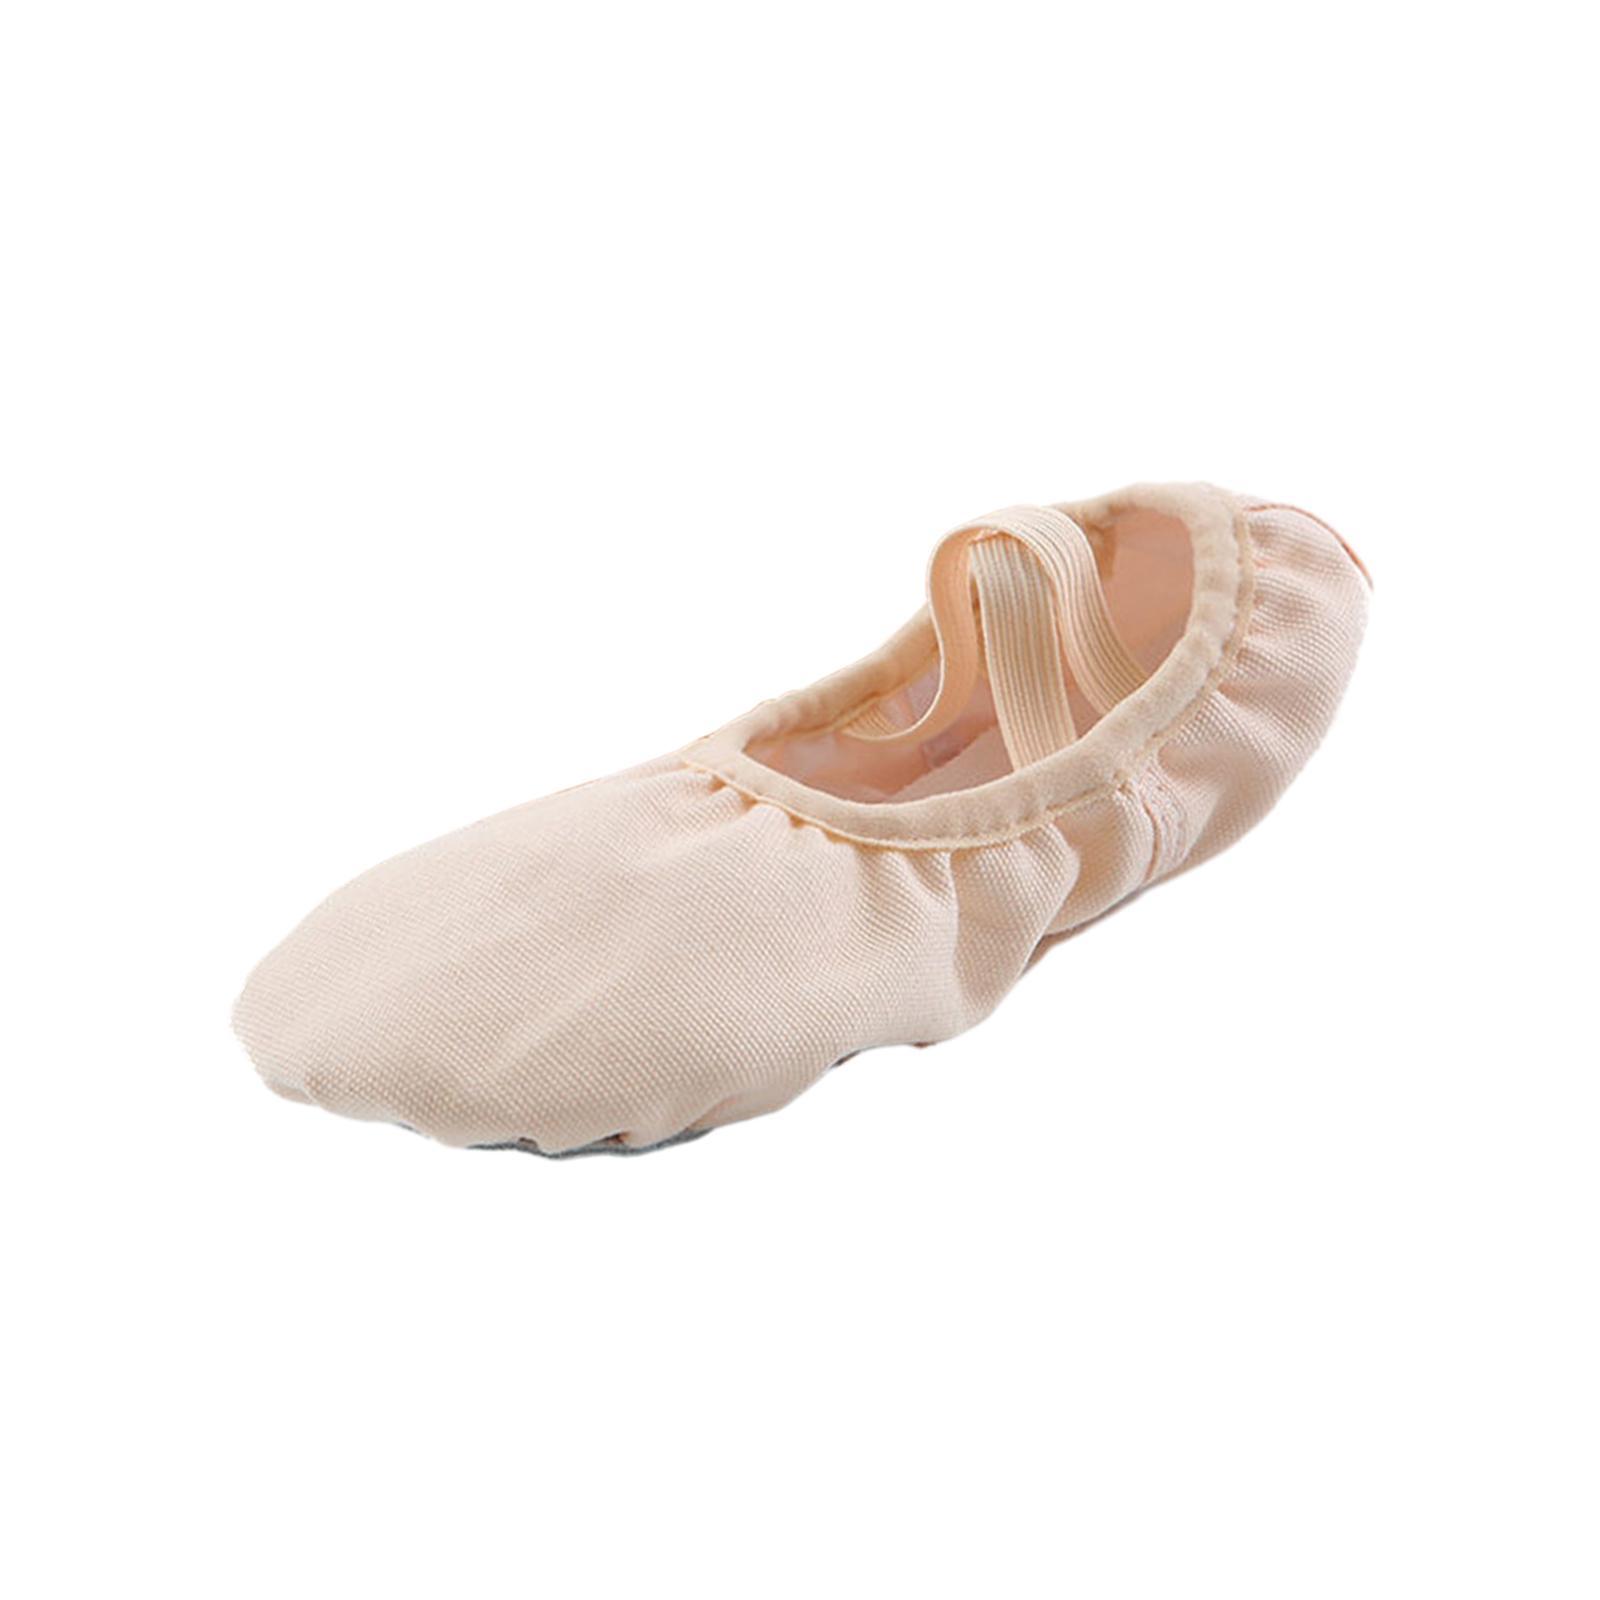 Woman Dance Shoes Gymnastic Shoes Practice Ballet Dance Shoes for Girls Kids